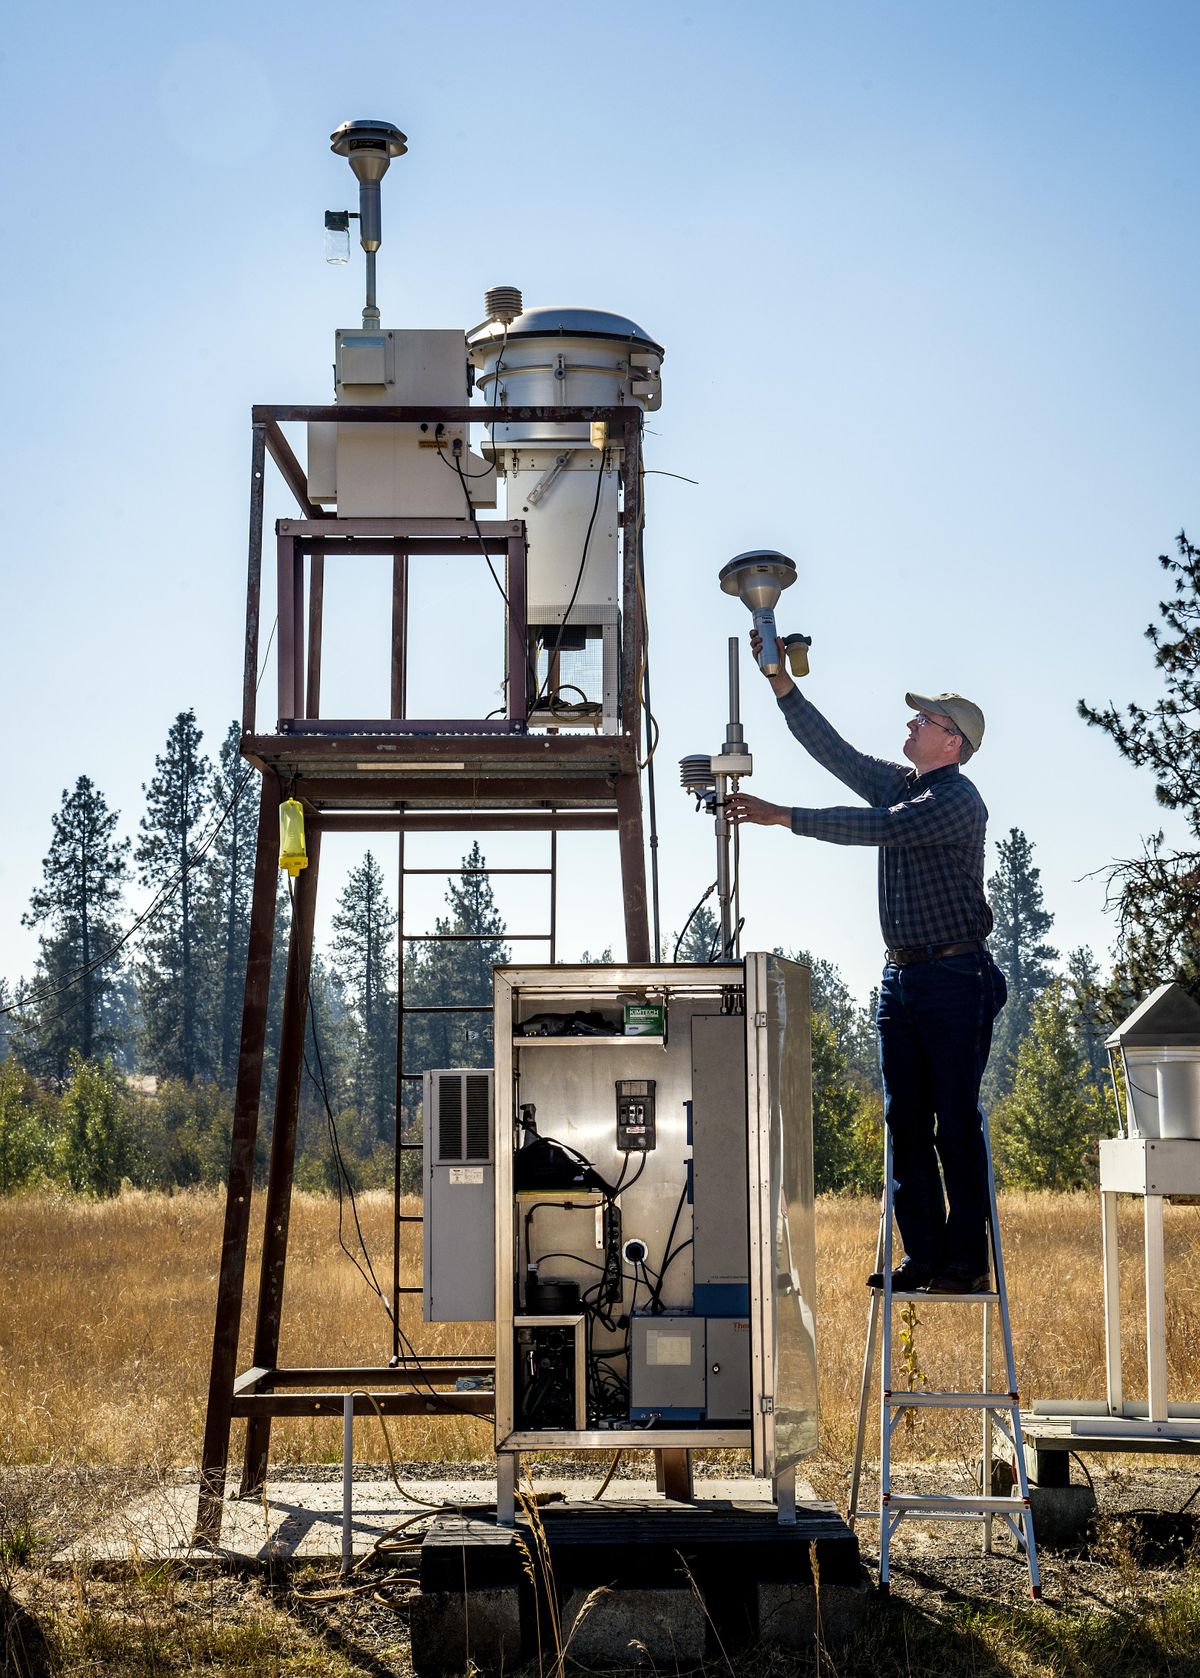 Mark Rowe, an air quality technician with the Spokane Regional Clean Air Agency performs maintenance on air quality measuring equipment at Turnbull National Wildlife Refuge south of Cheney. (Colin Mulvany)